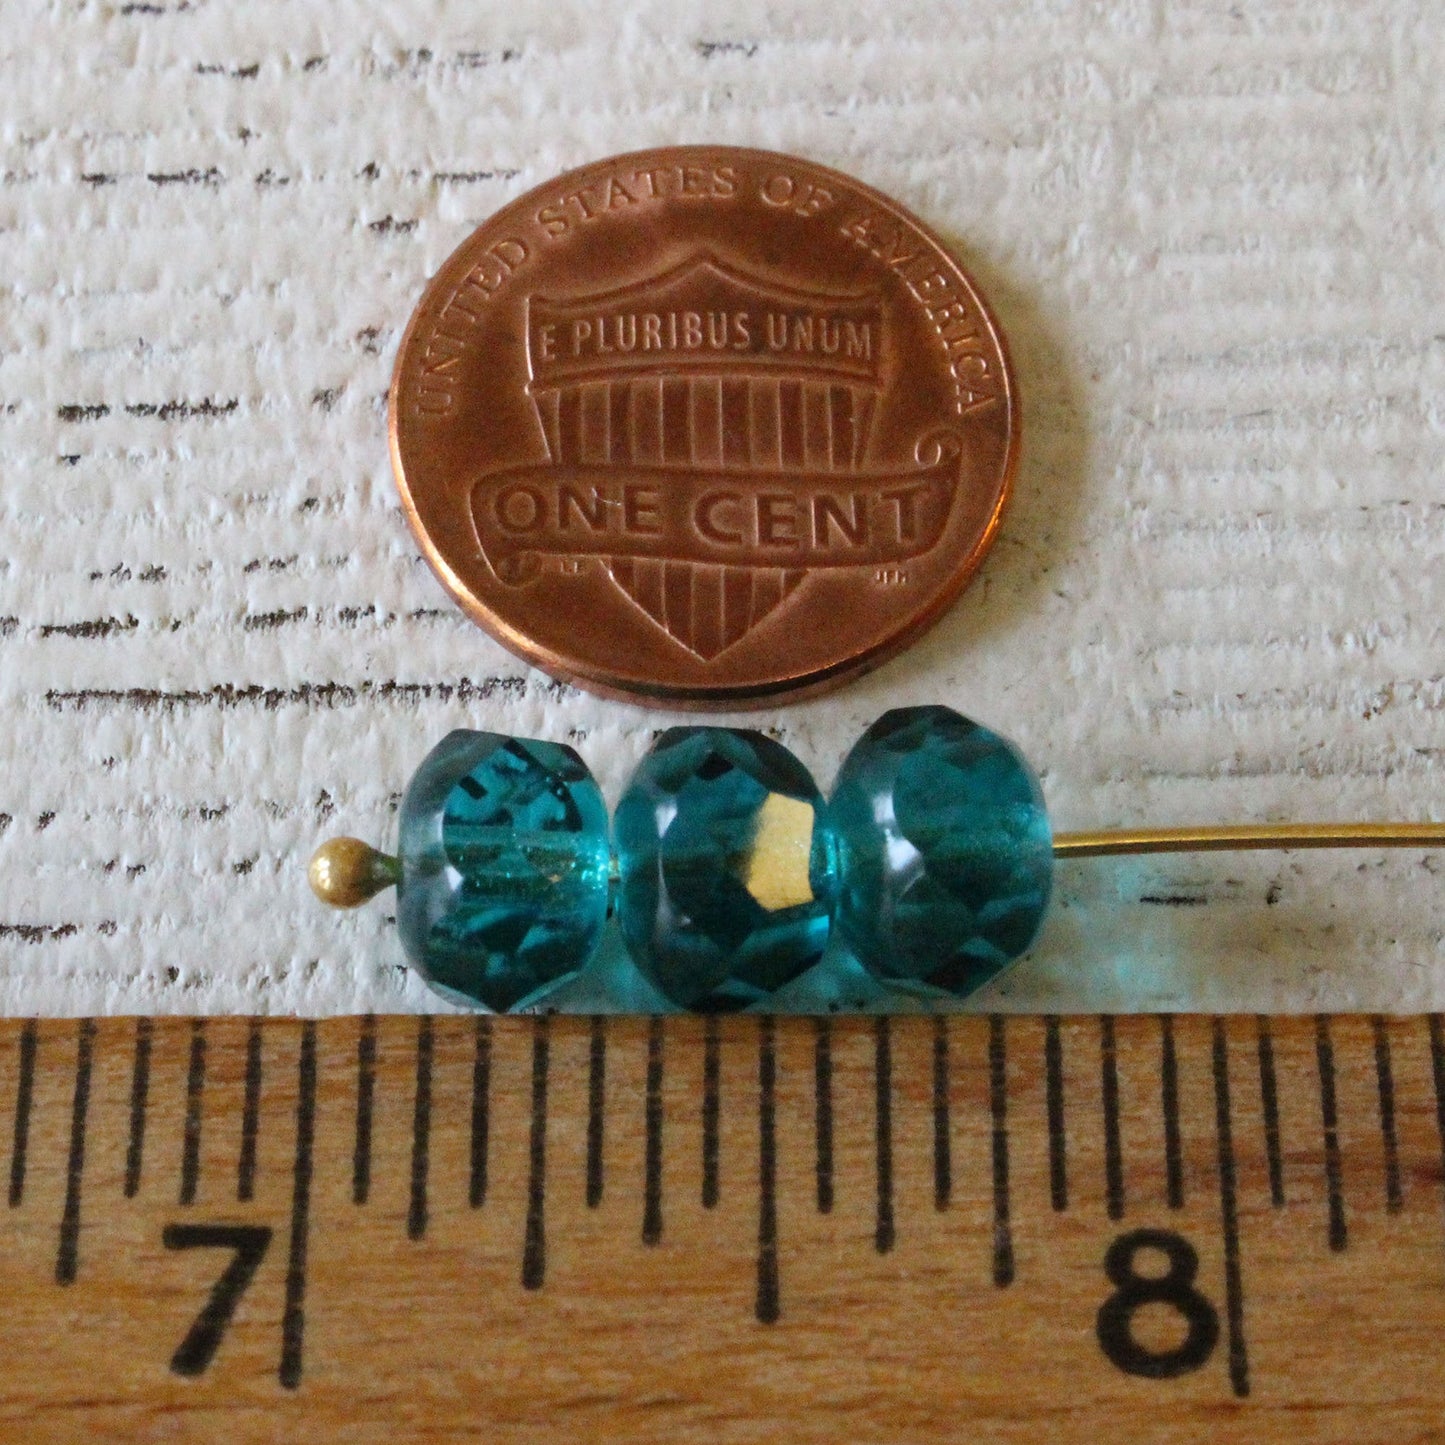 6x9mm Rondelle Beads - Transparent Teal - 20 Beads